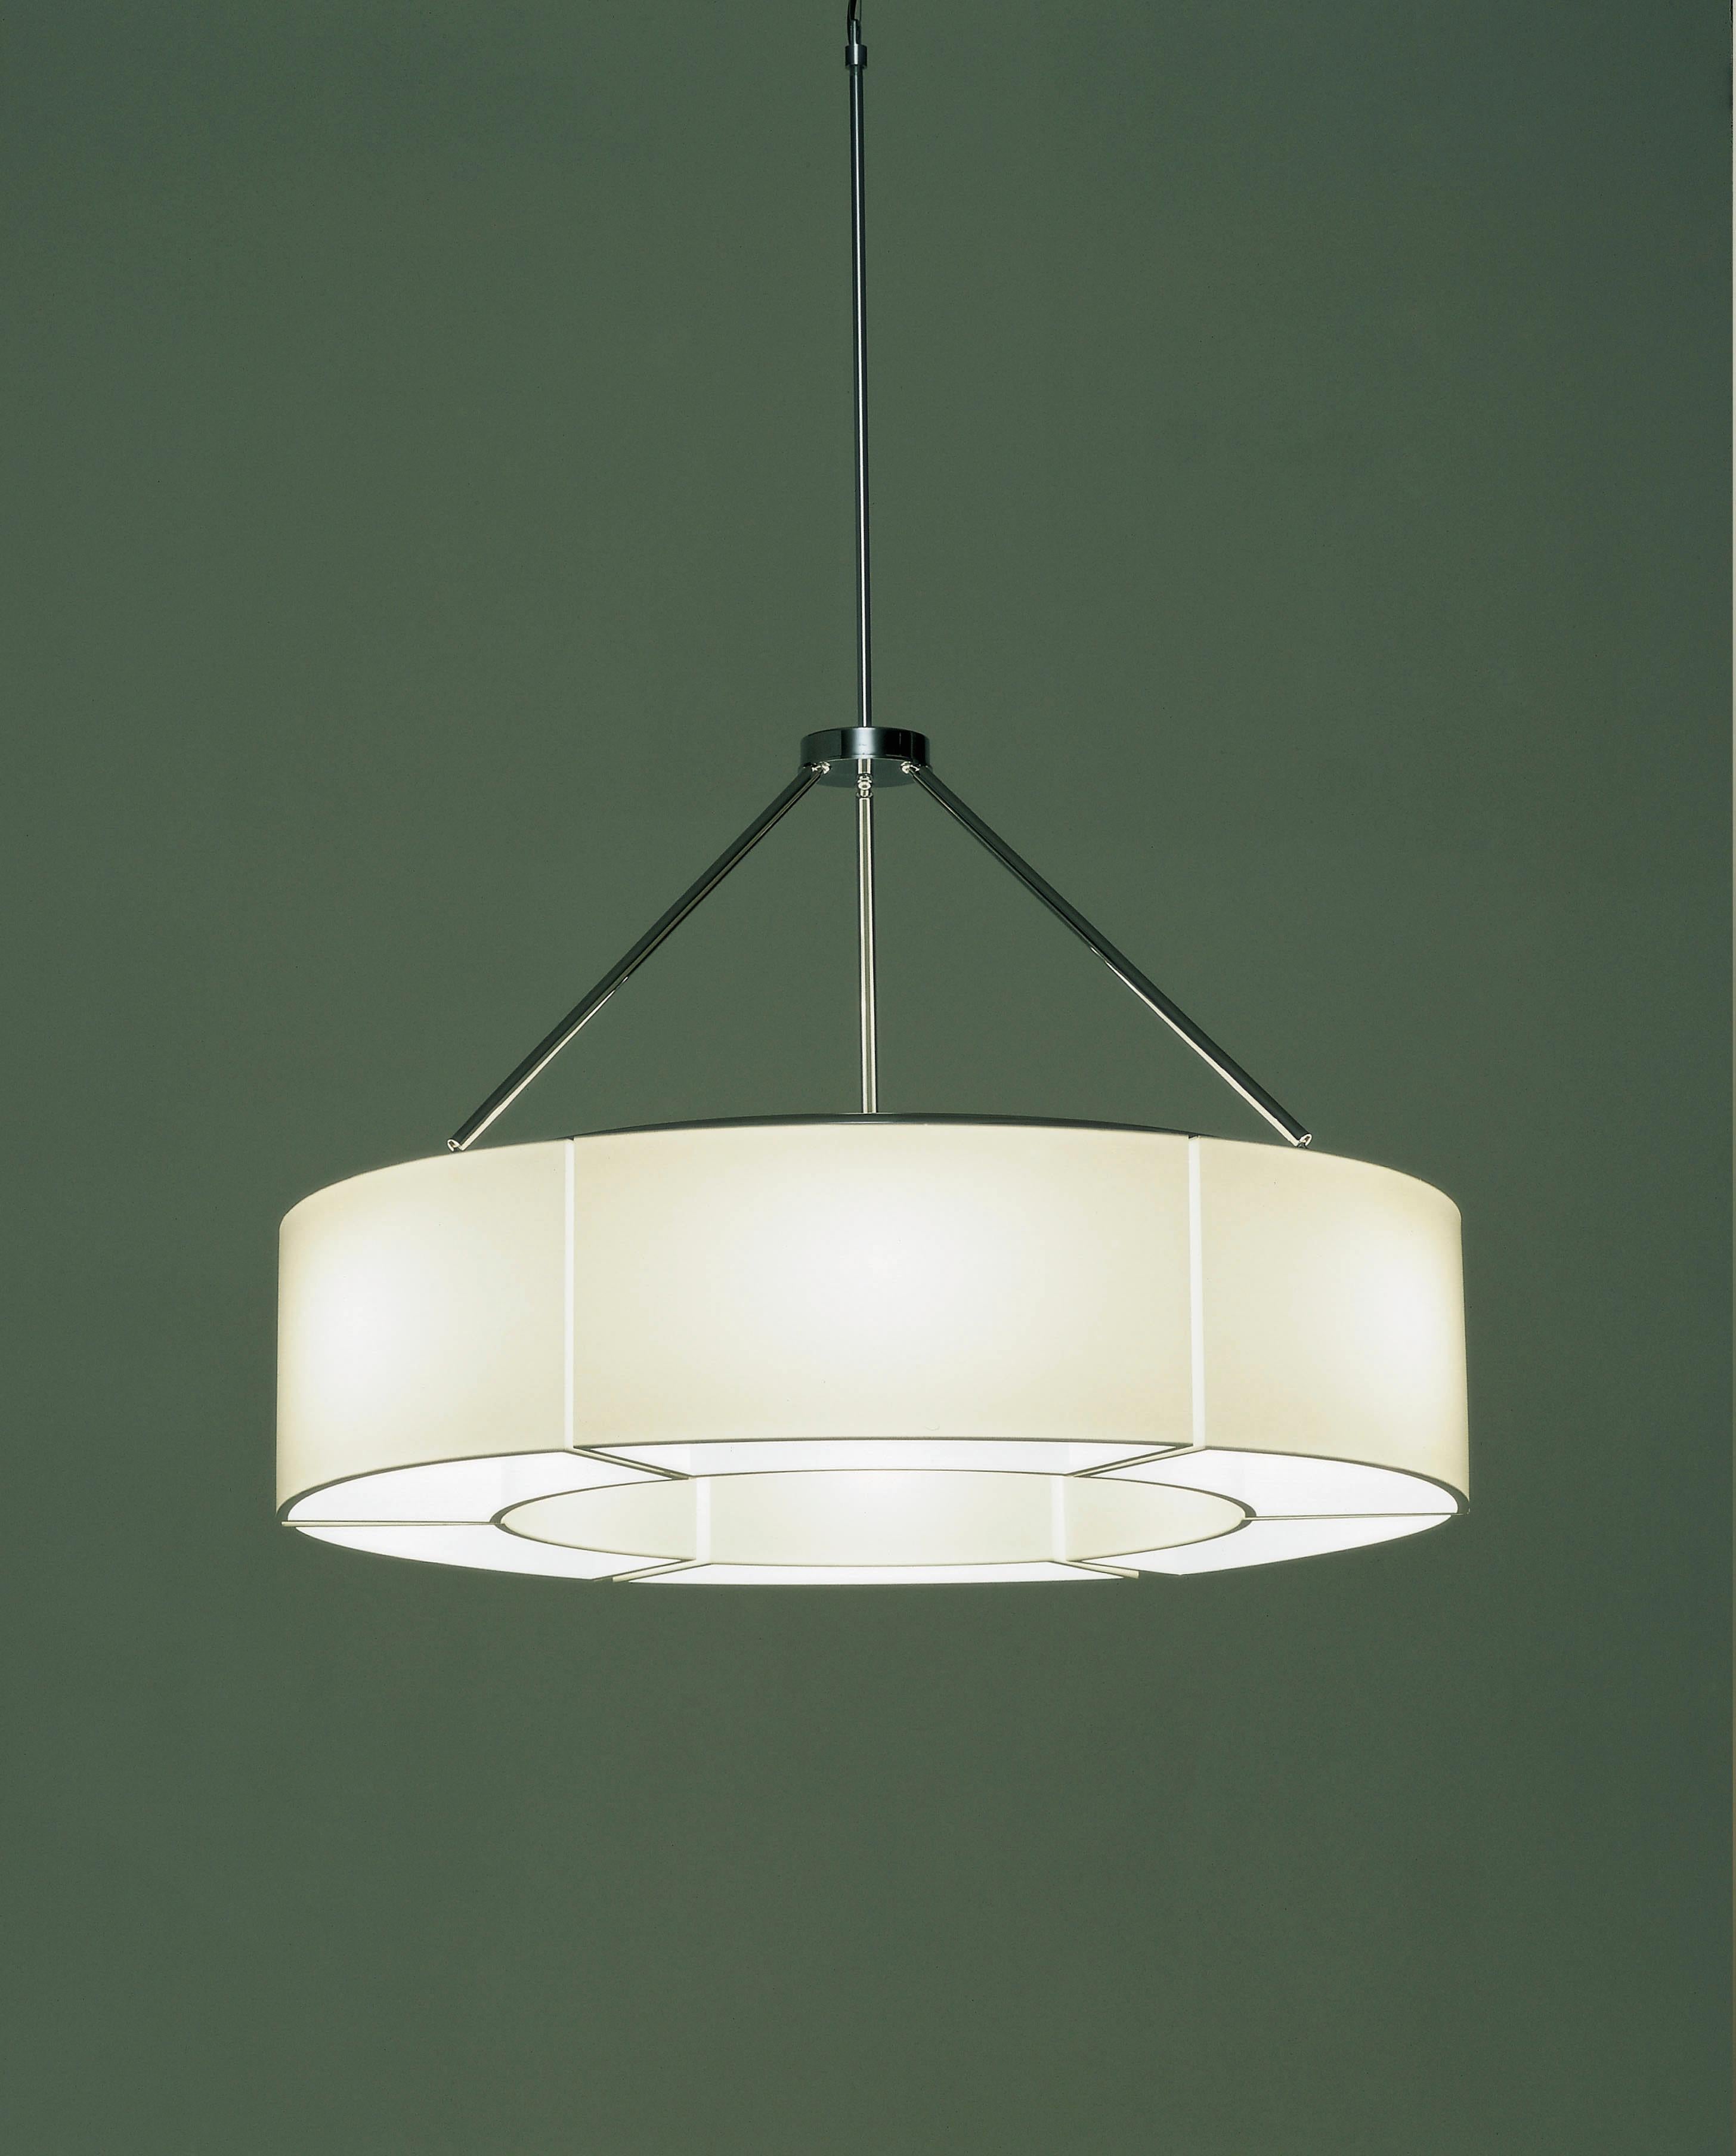 Sexta pendant lamp by Miguel Milá
Dimensions: D 80 x H 20 cm
Materials: Metal, PVC, opal translucent methacrylate diffusers.
Telescopic tube: 40/75 cm.
Available in 4 support options, with telescopic tube: 40/75 cm, 82/152 cm or 156/302 cm and